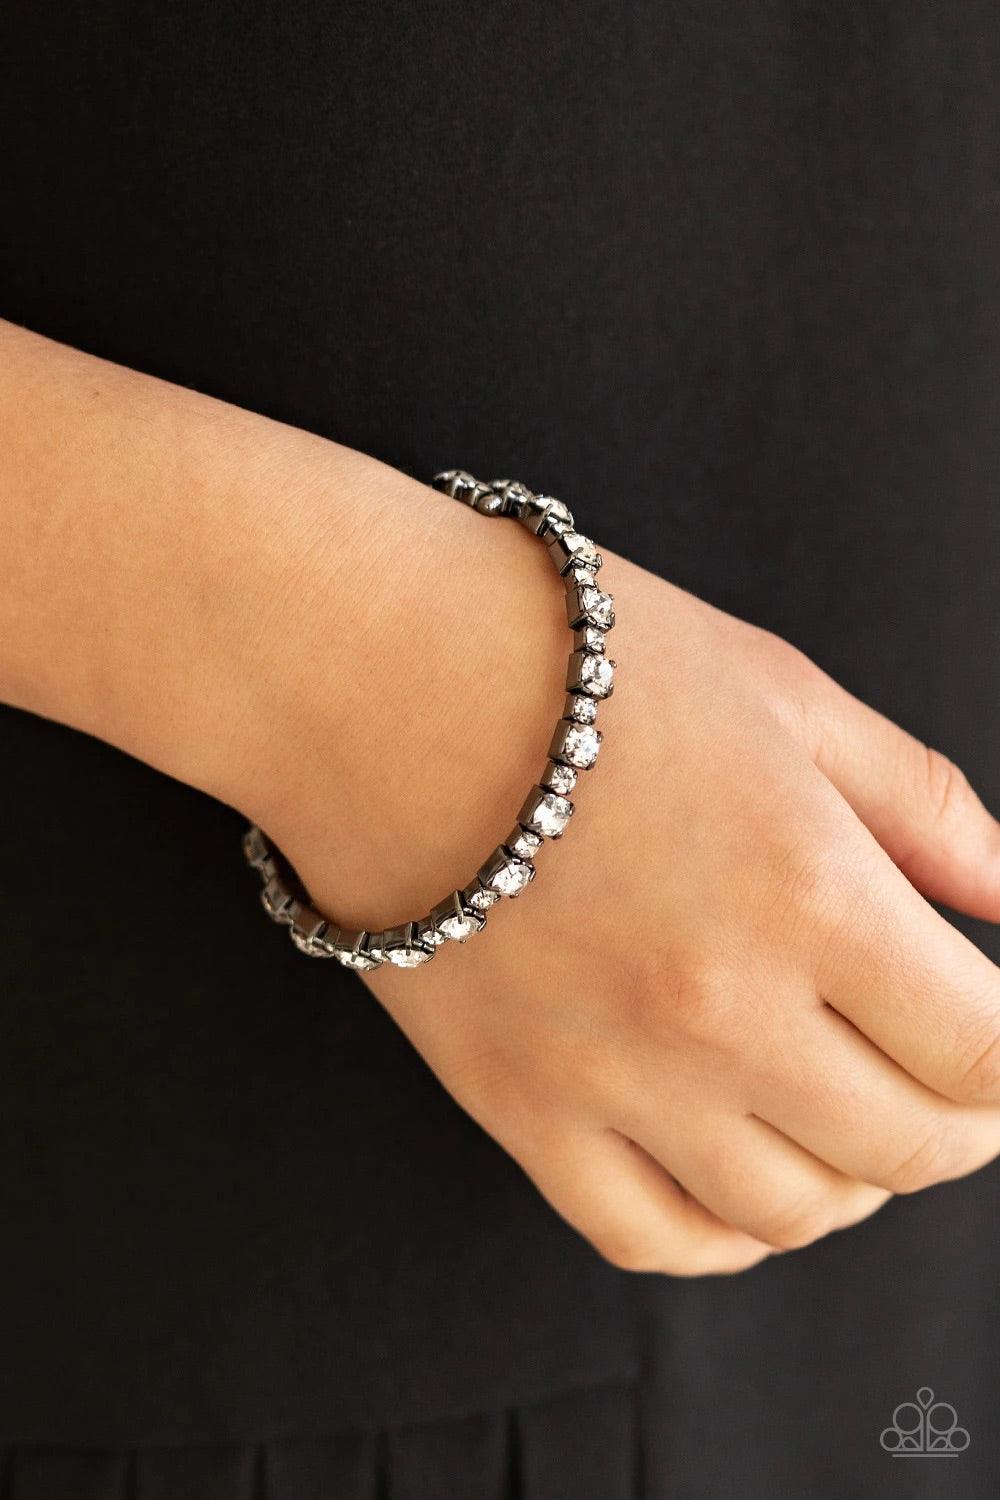 Paparazzi Accessories Photo Op - Black Featuring gunmetal square fittings, dainty and classic white rhinestones delicately alternate along a flexible wire, coiling into a glamorous centerpiece around the wrist. Jewelry